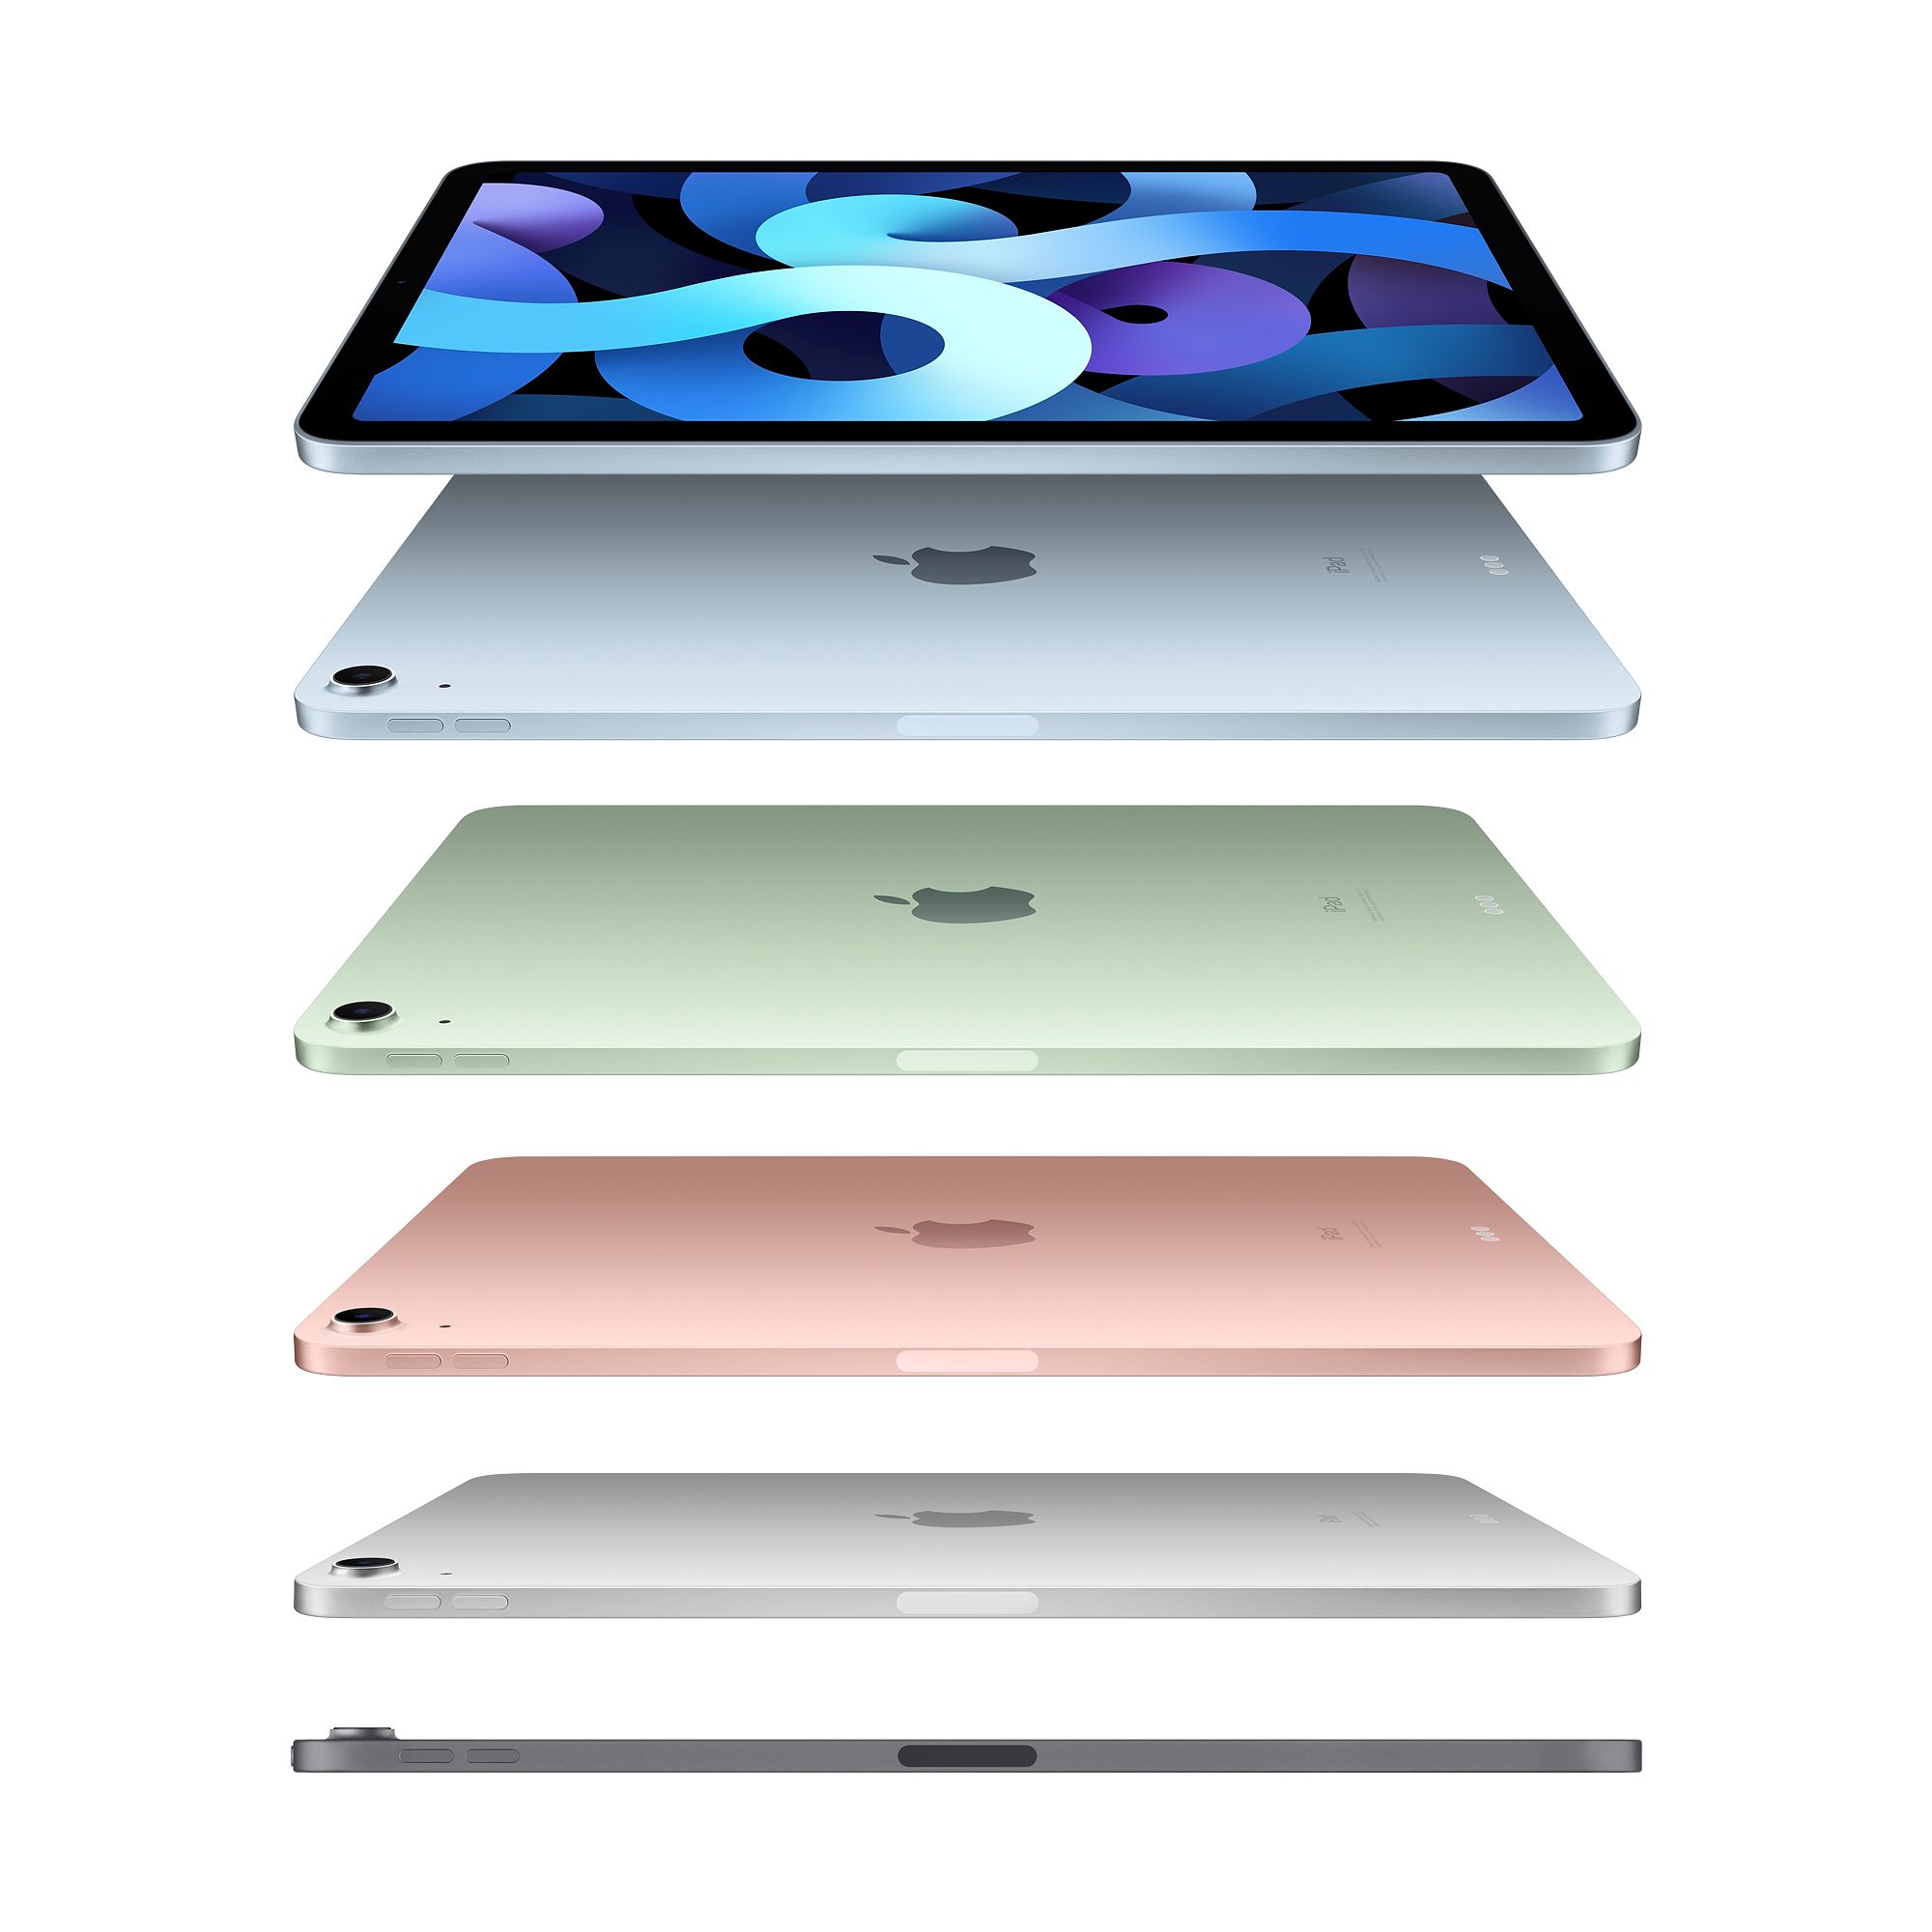 iPad Air 5 vs 4 Should You Upgrade Your Device? Dignited